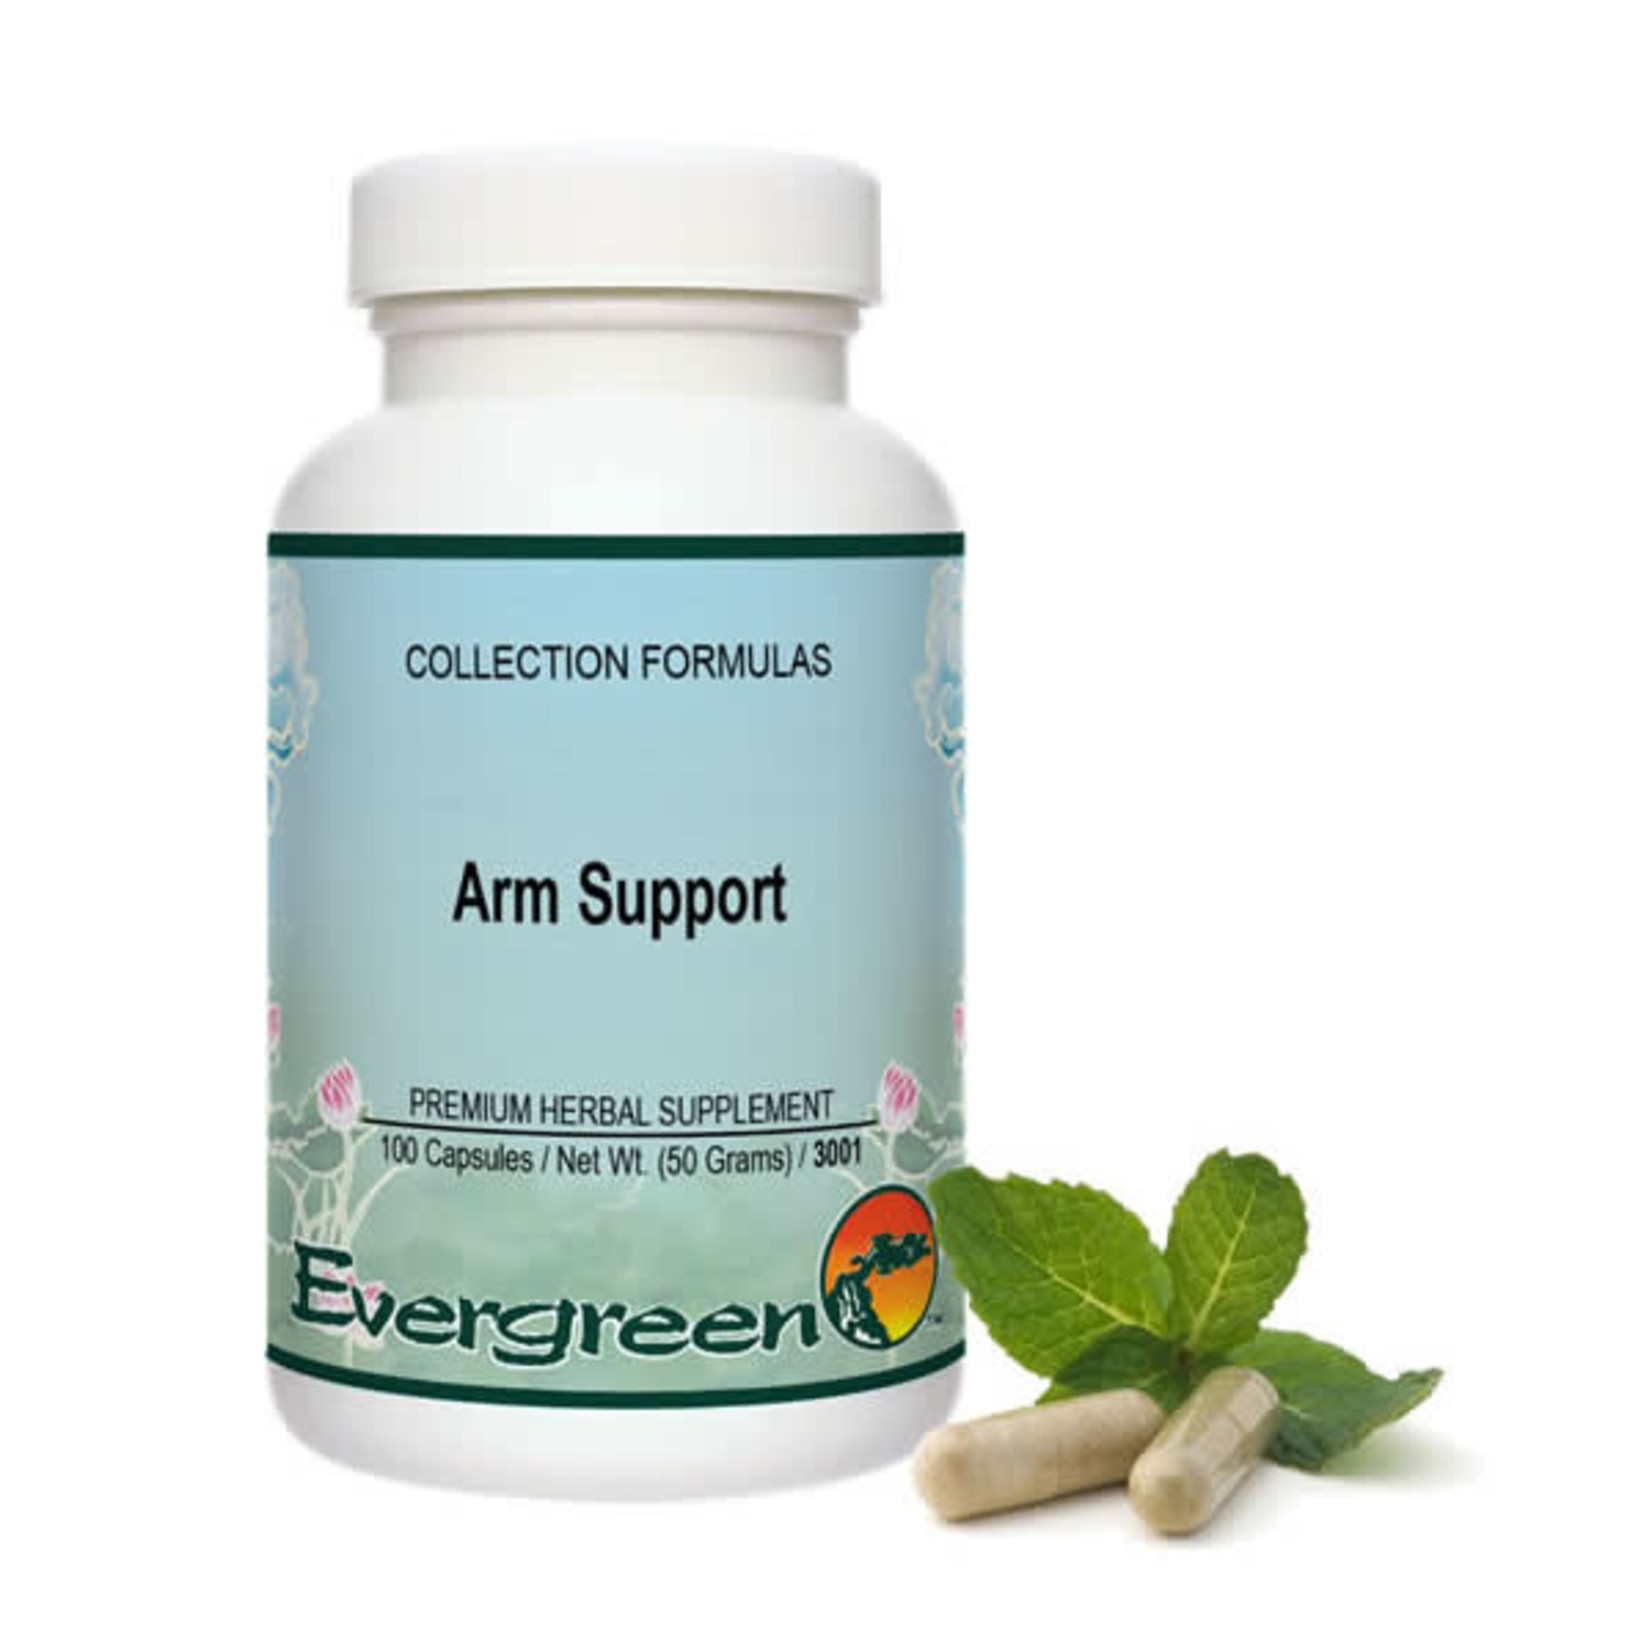 Arm Support (Evergreen Herbs)